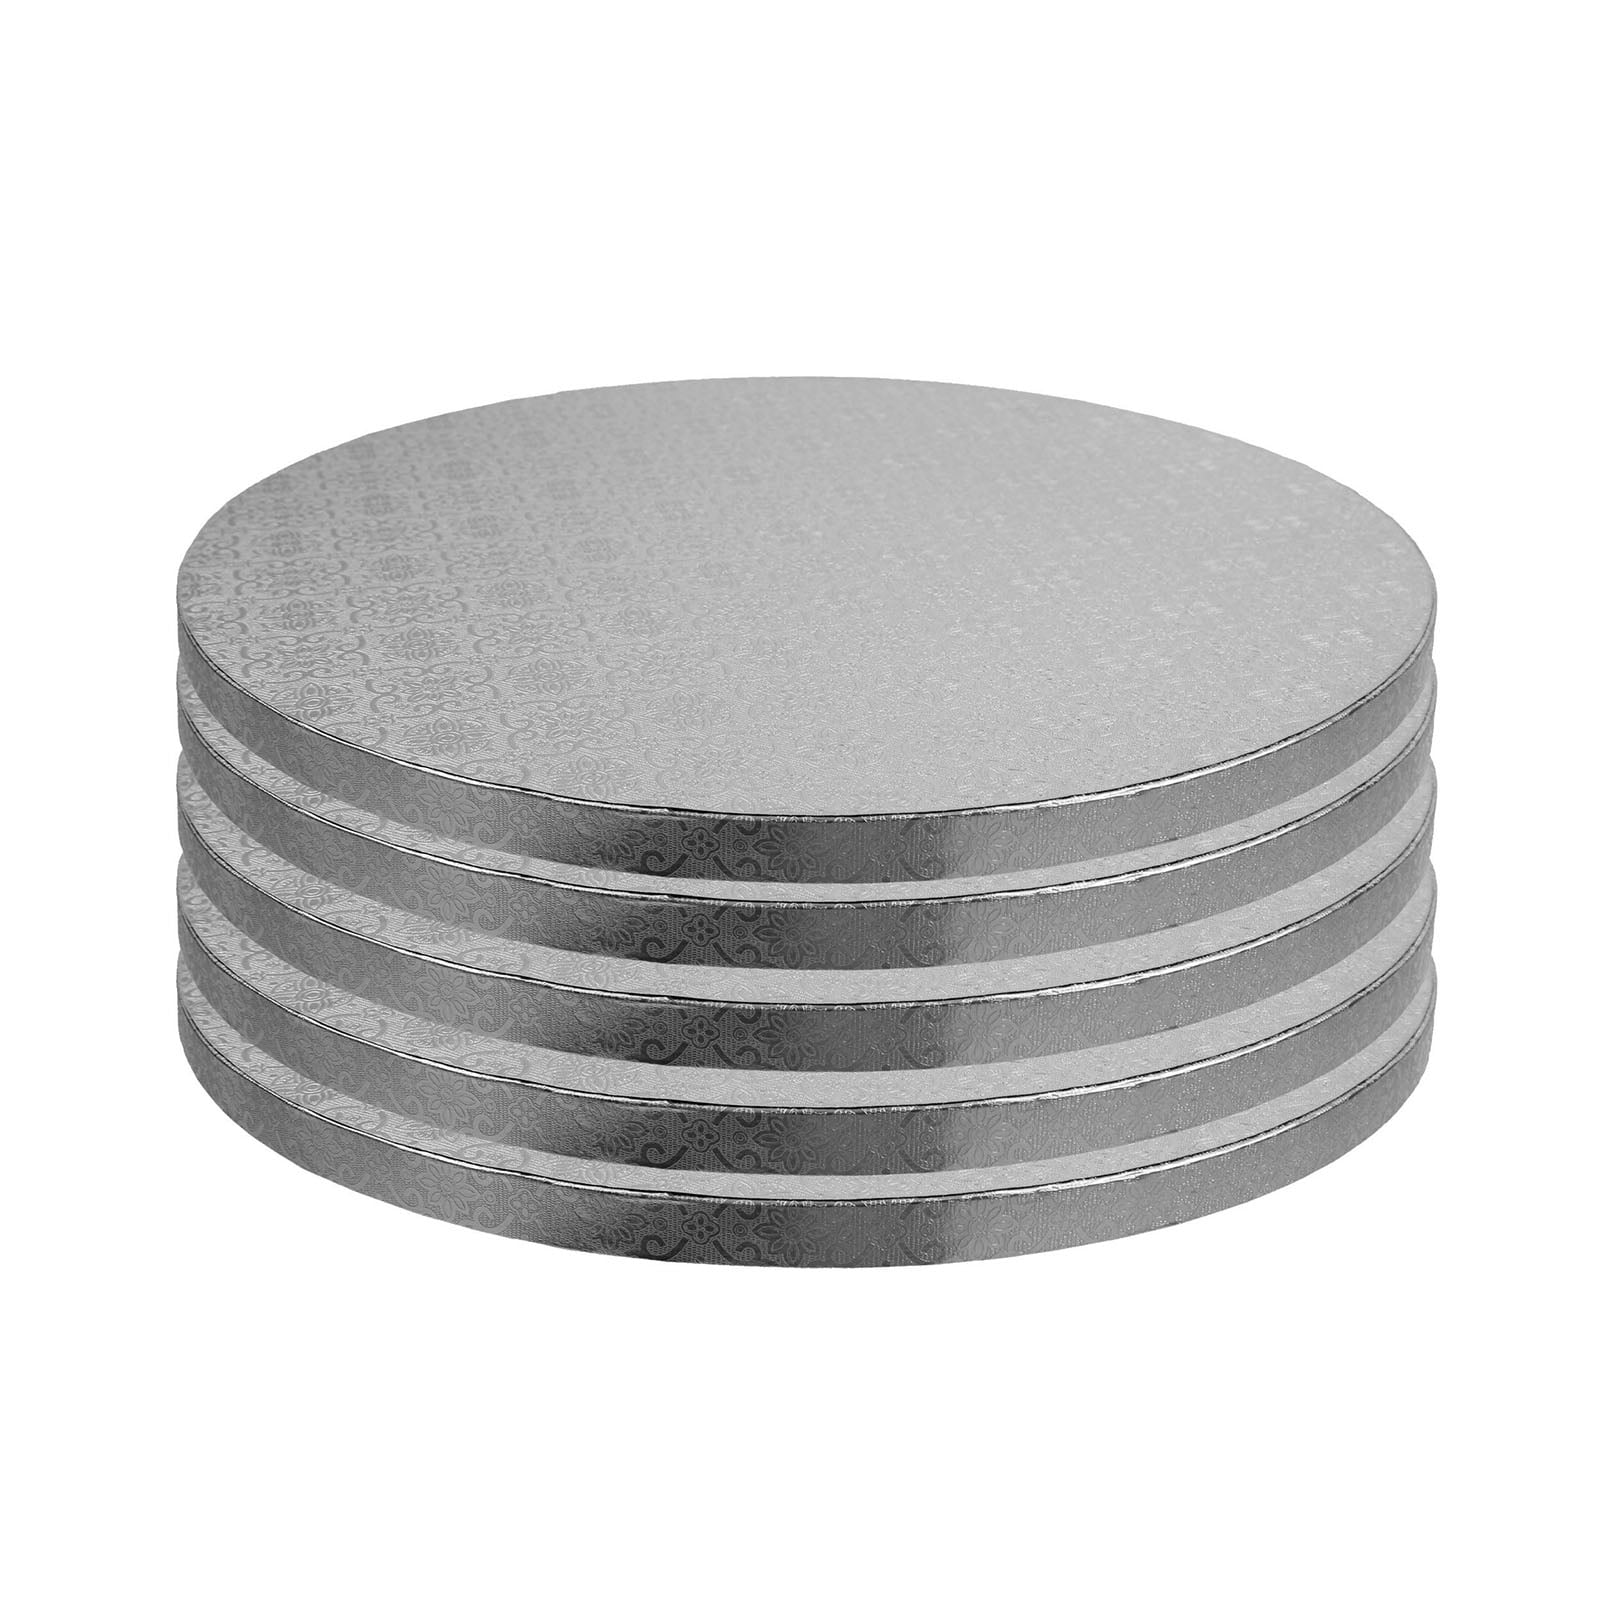 Bocguy Cake Board Round, Pack of 5 Cake Board, 30 cm Round with 12 mm Thick  Robust Design, Silver Cake Board for Cake Base, Cake Base Plates :  : Home & Kitchen